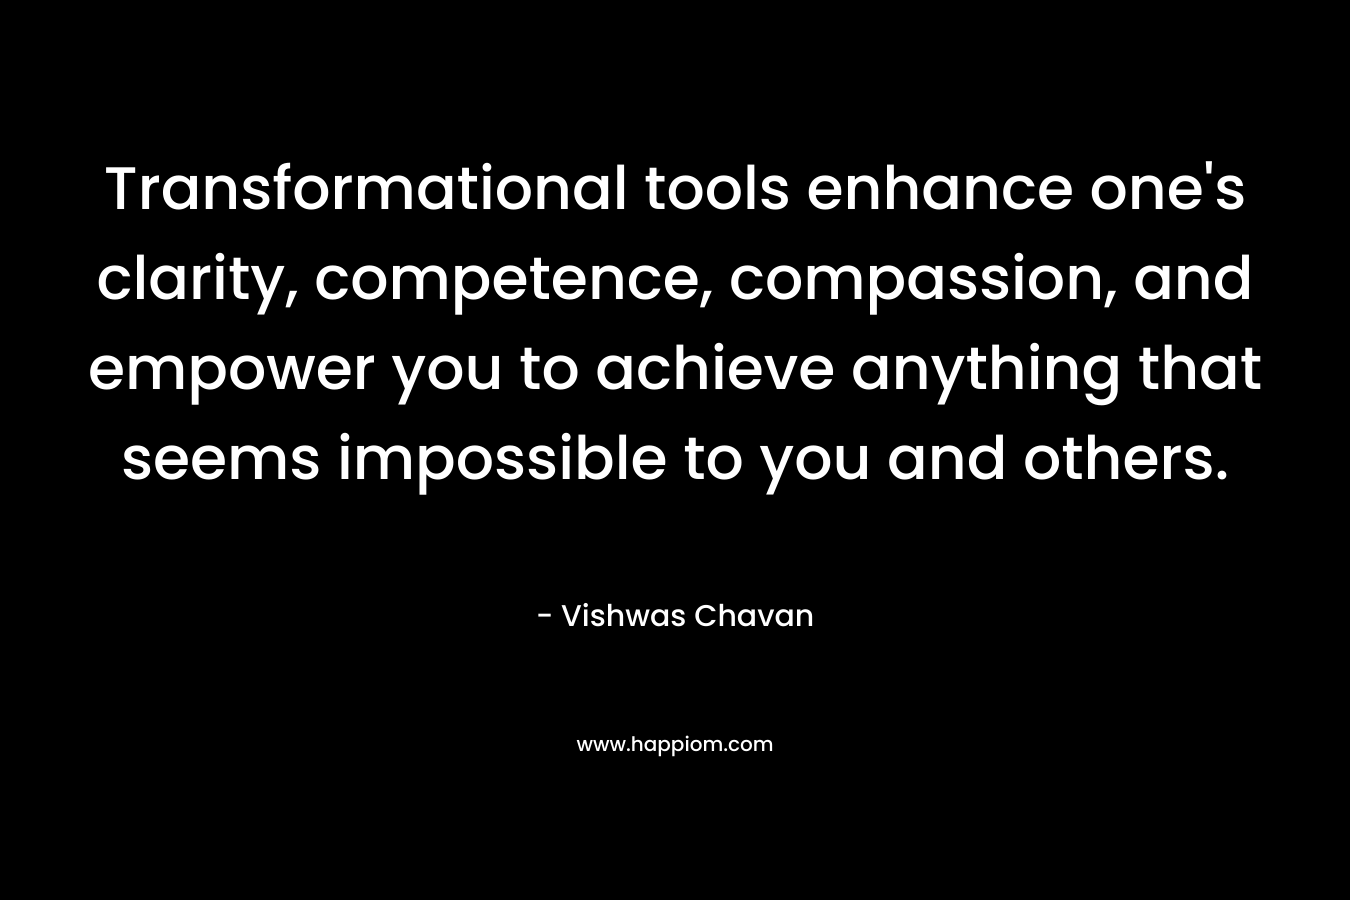 Transformational tools enhance one’s clarity, competence, compassion, and empower you to achieve anything that seems impossible to you and others. – Vishwas Chavan